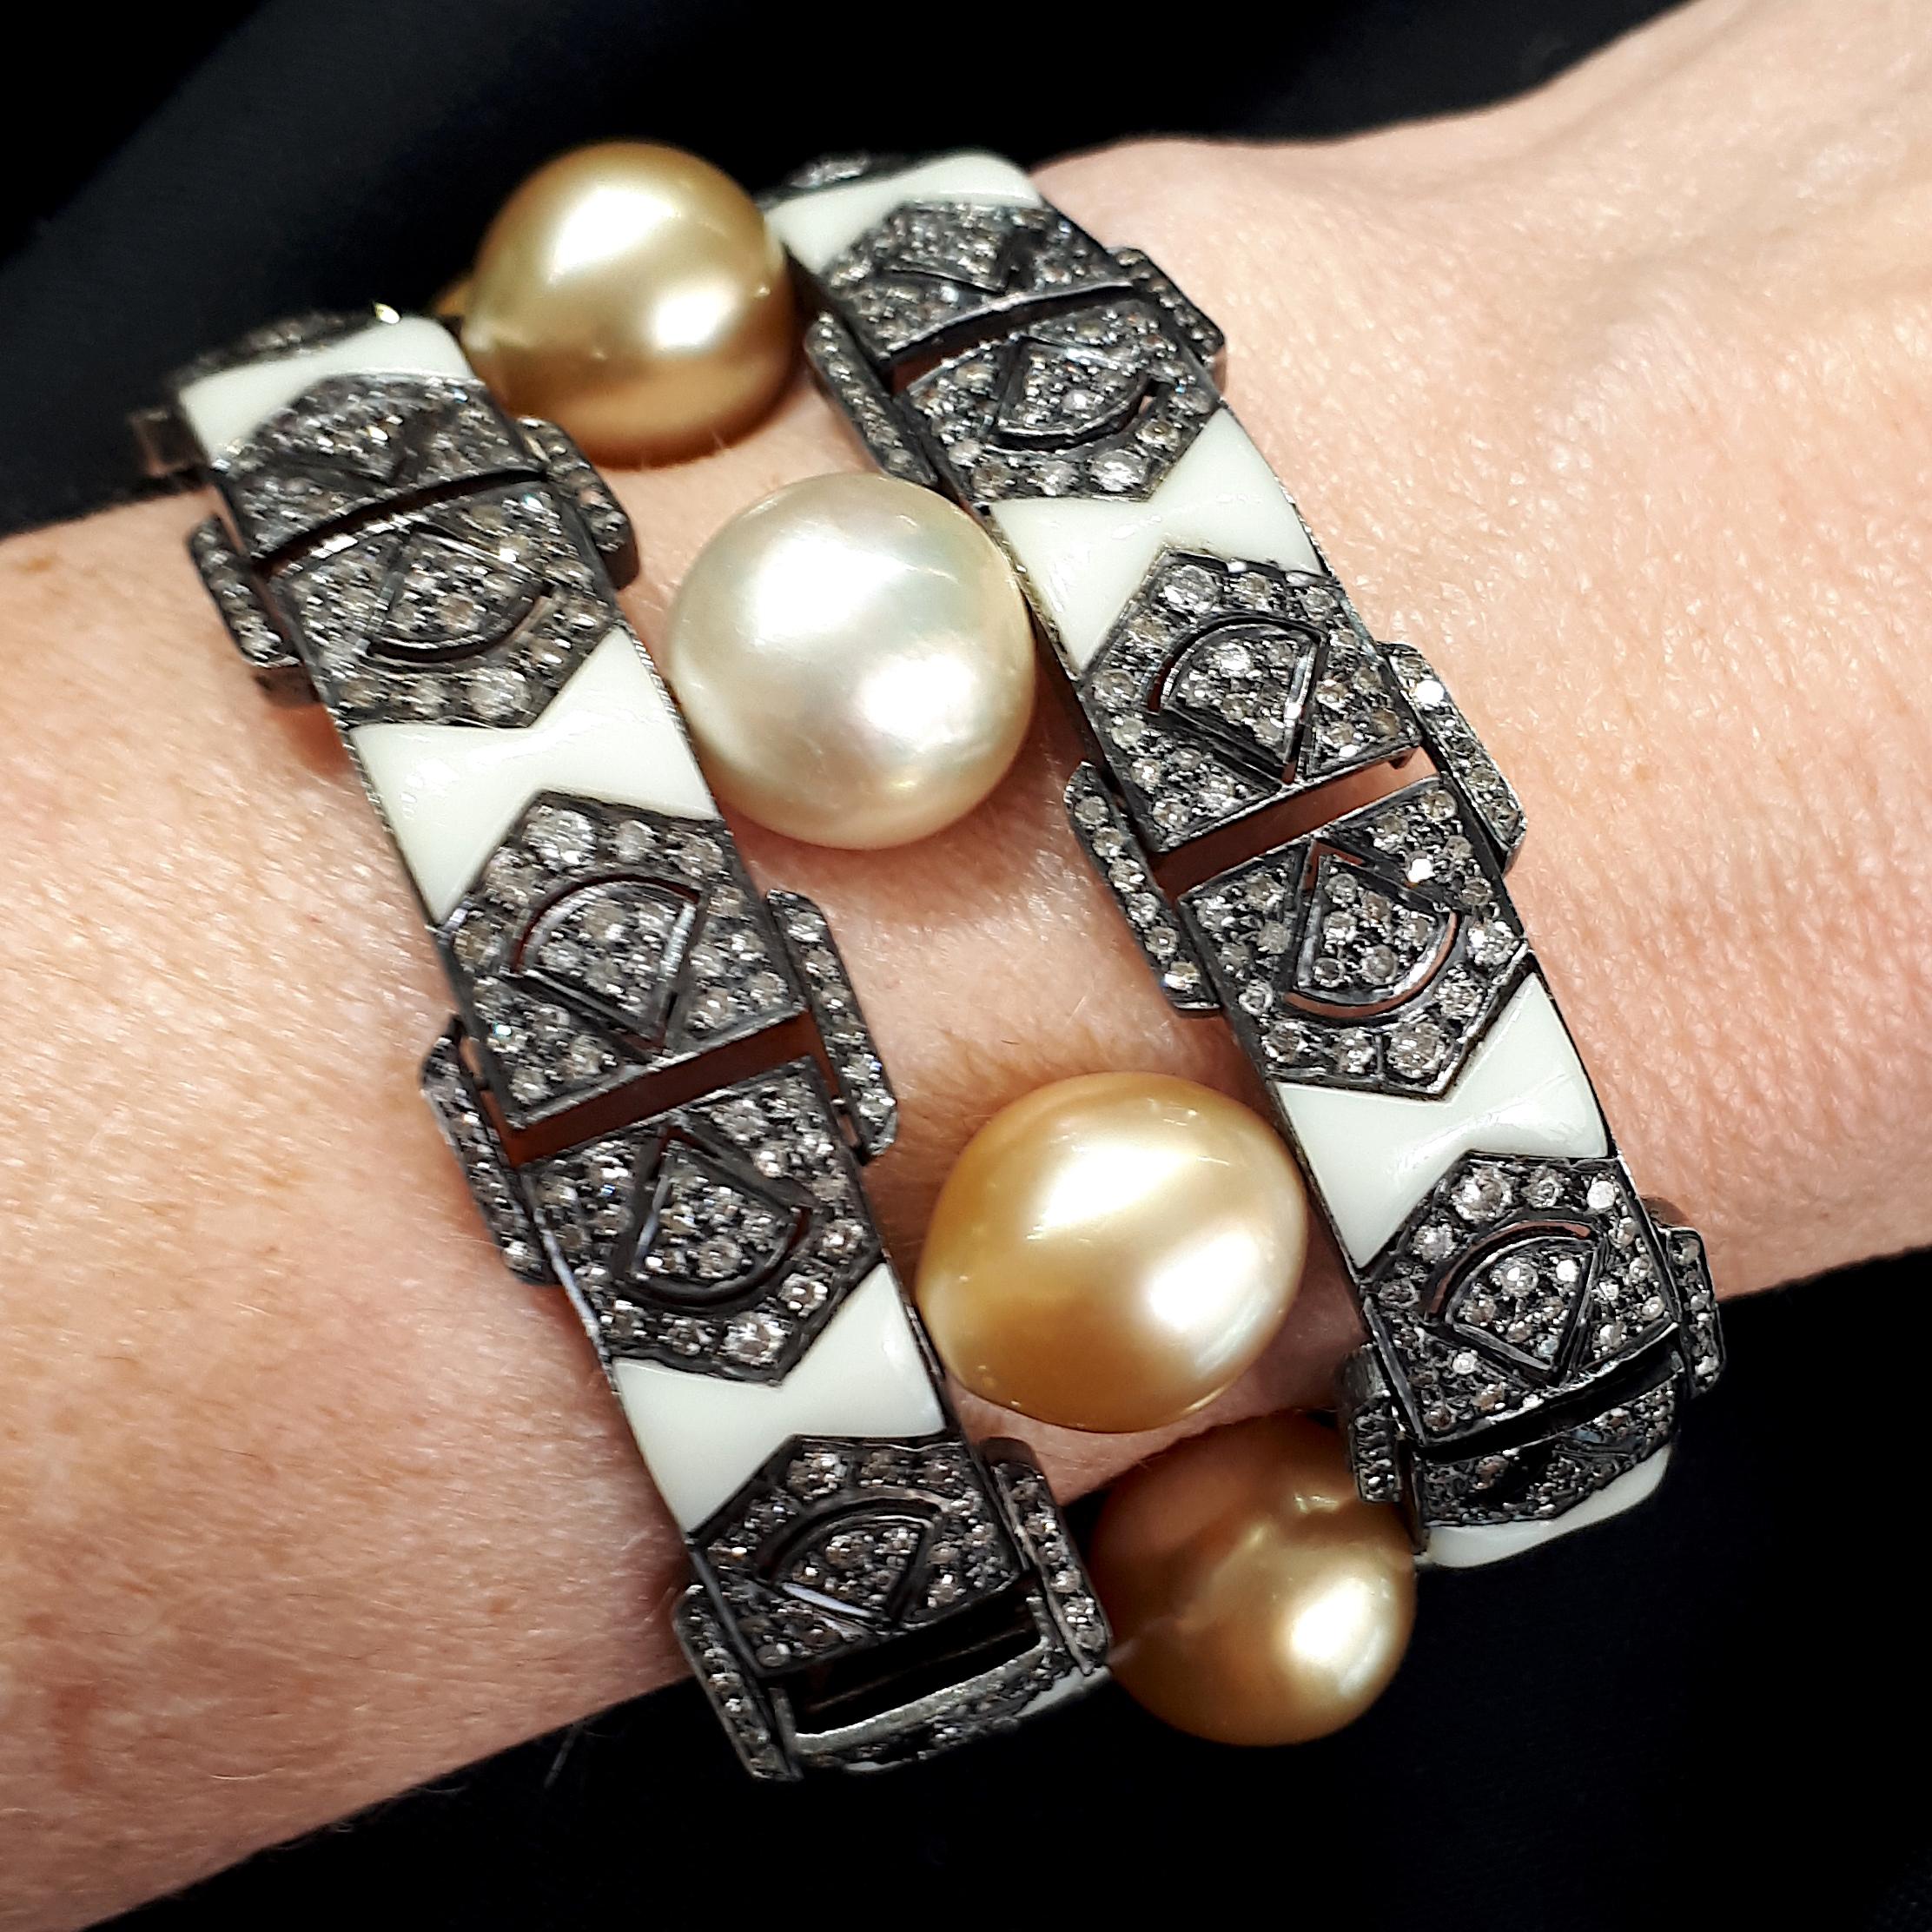 A Bakelite Bracelet, comprising of two outer rows of white Bakelite, with gold coloured South Sea pearls set in-between, and eight-cut diamonds set either side, mounted in silver and gold. With two tongue fittings, and figure-of-eight safety catches.